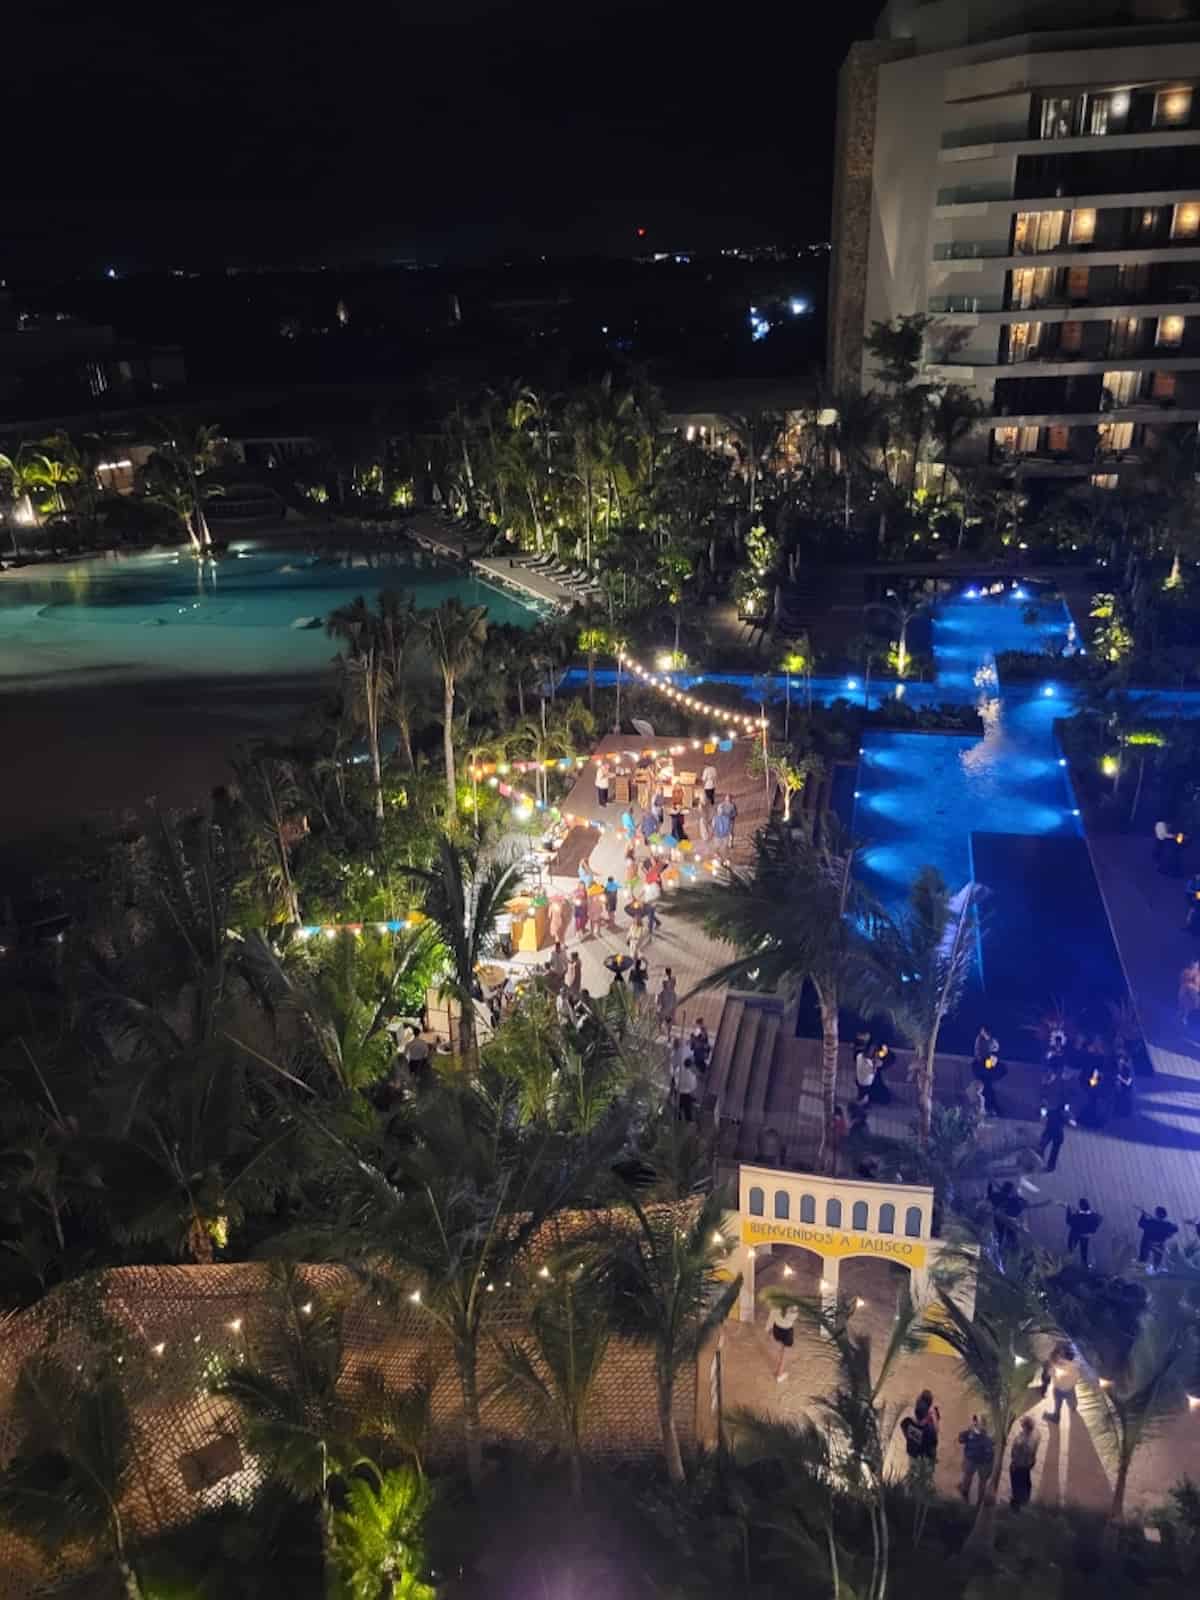 Resort party in Mexico.